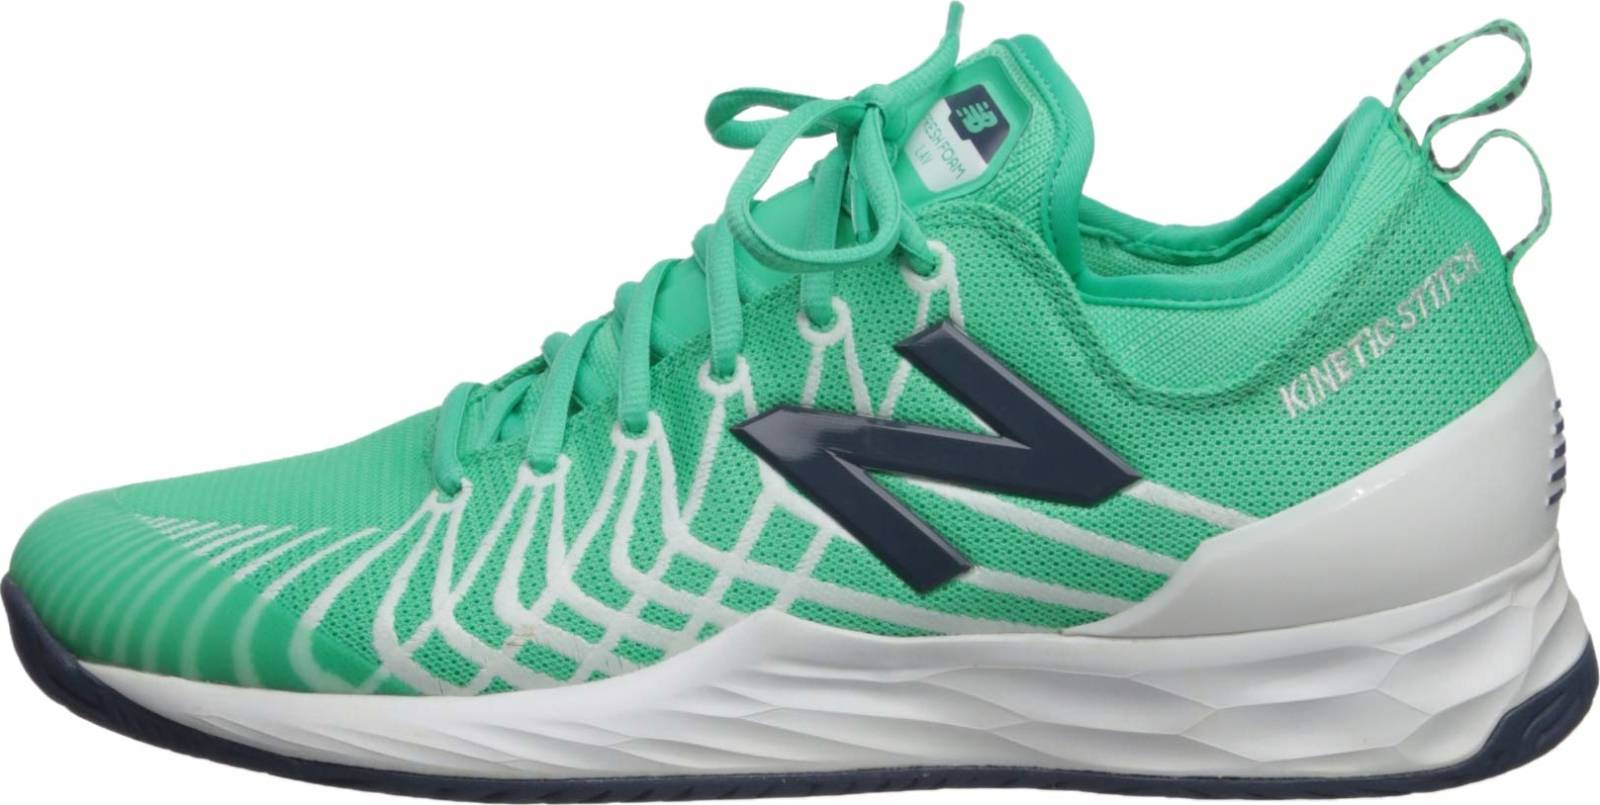 Save 52% on New Balance Tennis Shoes 